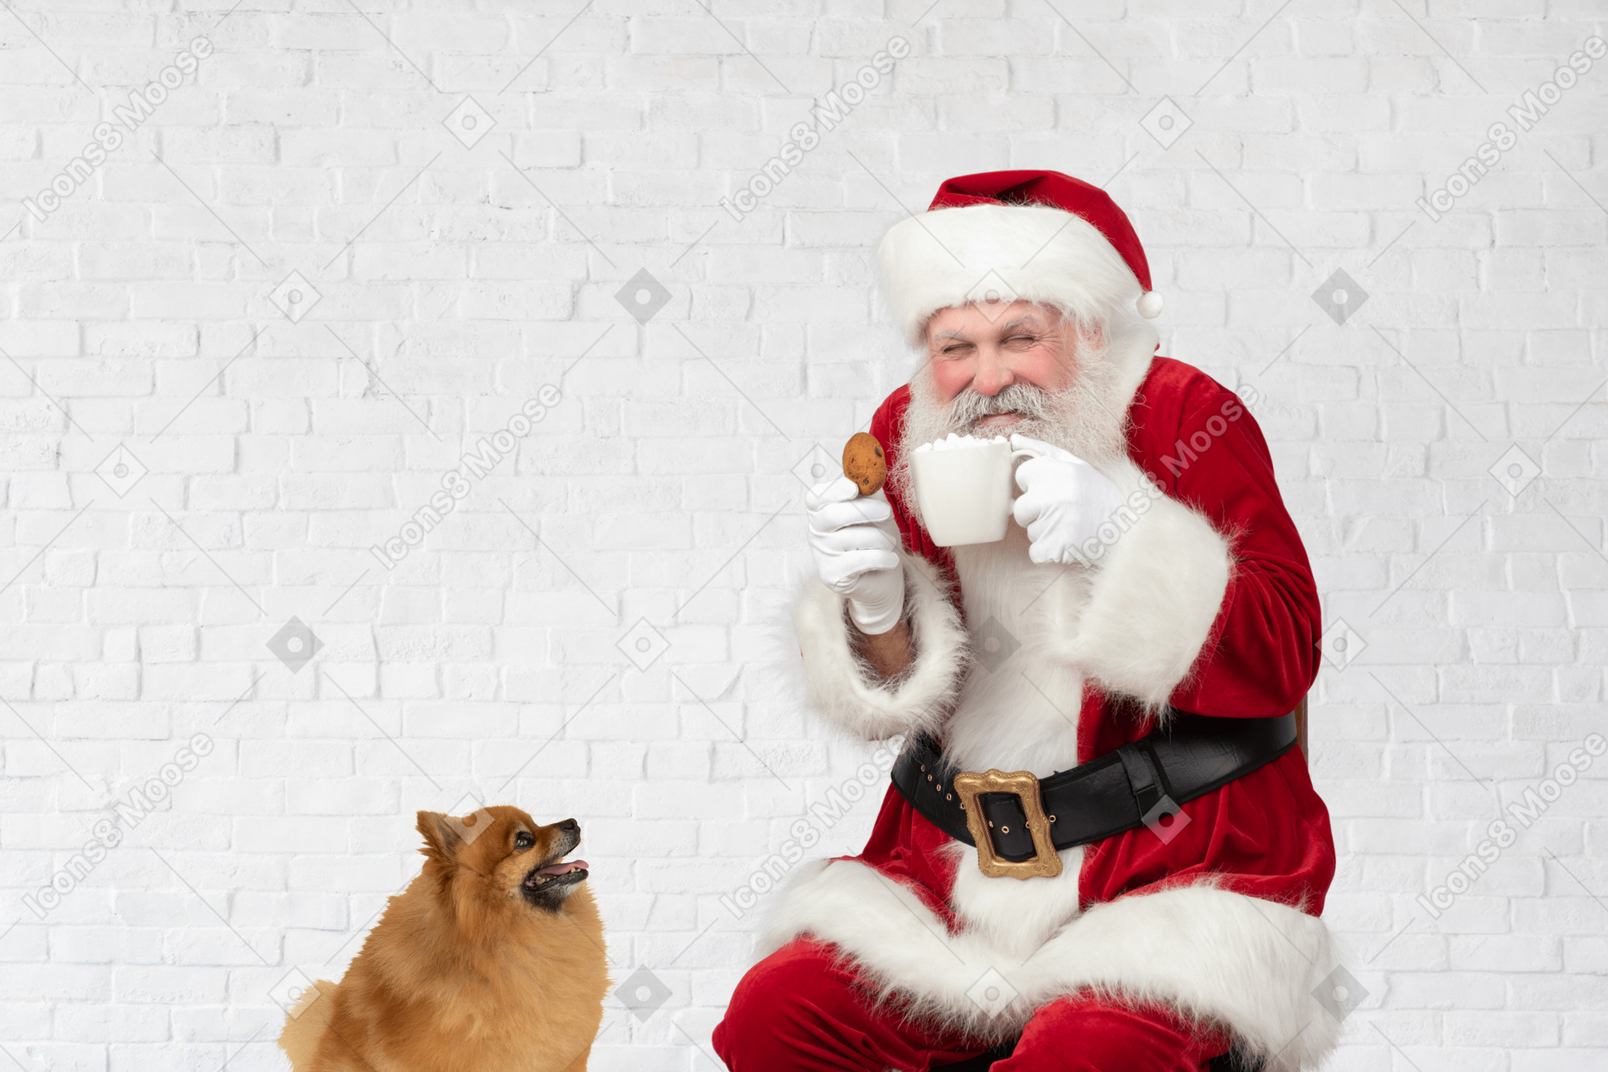 Cute red spitz looking at naughty santa holding a cookie and a cup of cacao